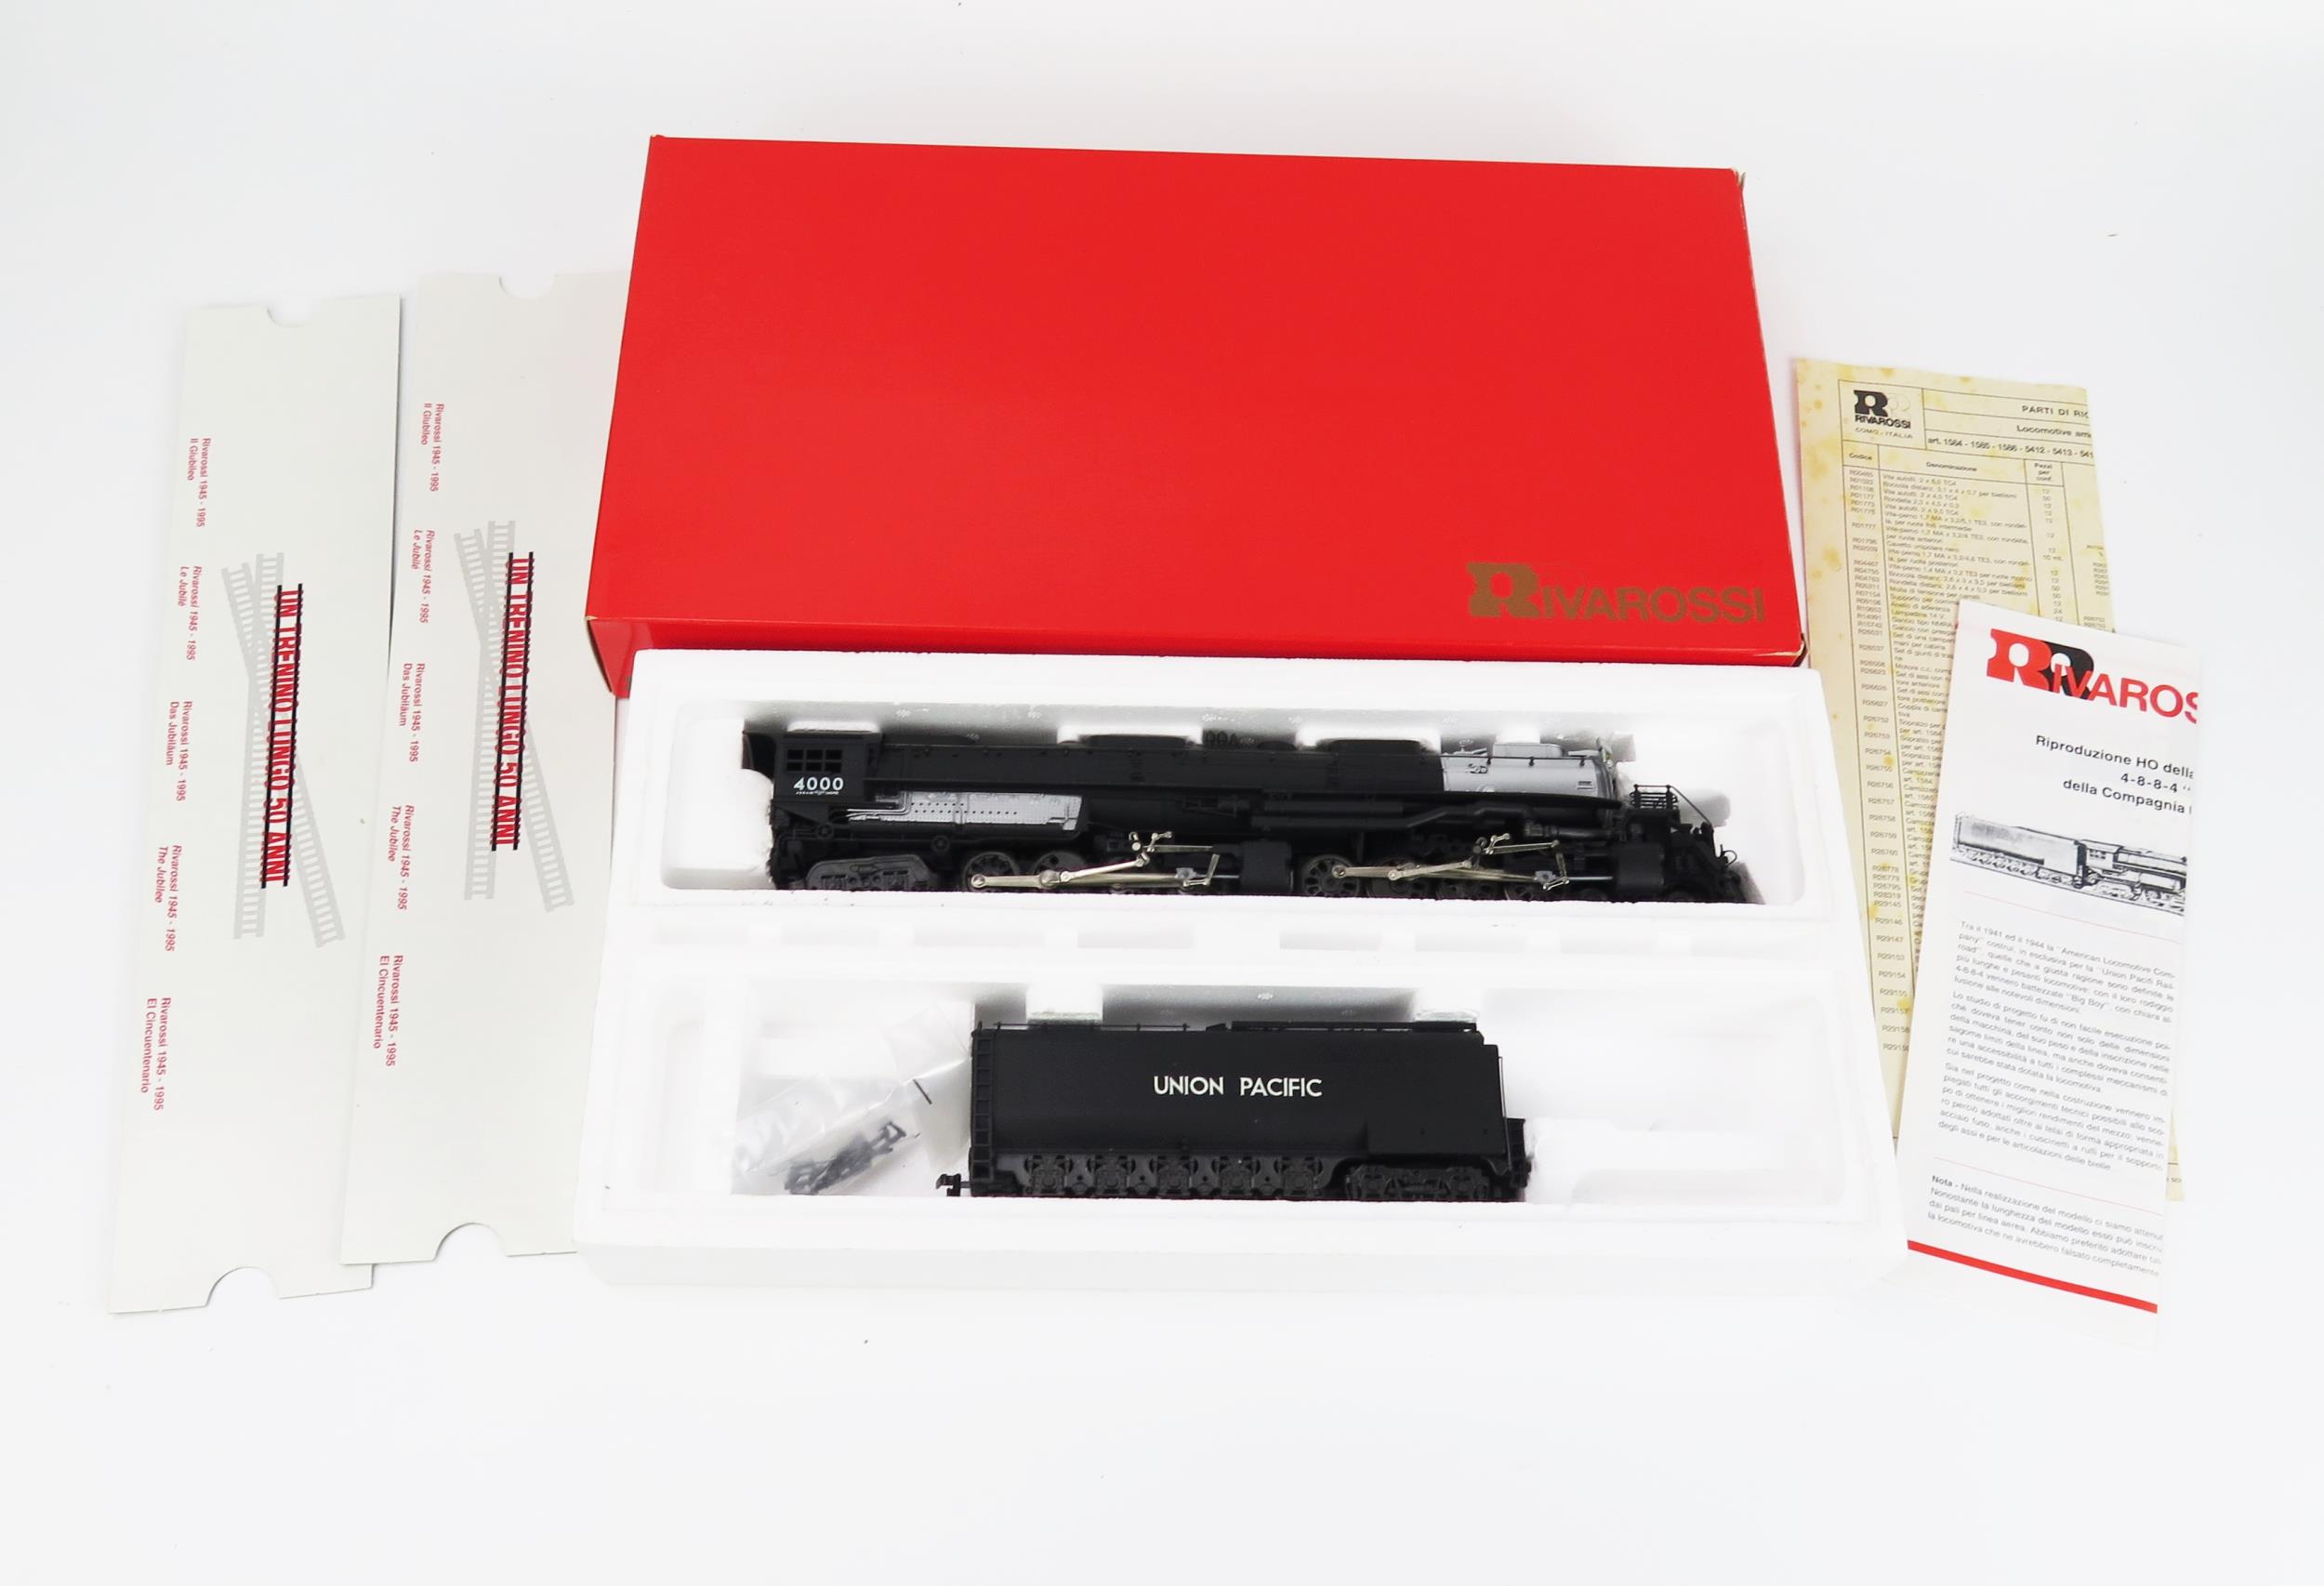 Rivarossi HO /OO Gauge 5412 Union Pacific 4-8-8-4 Big Boy 4000 - excellent in box with card covers